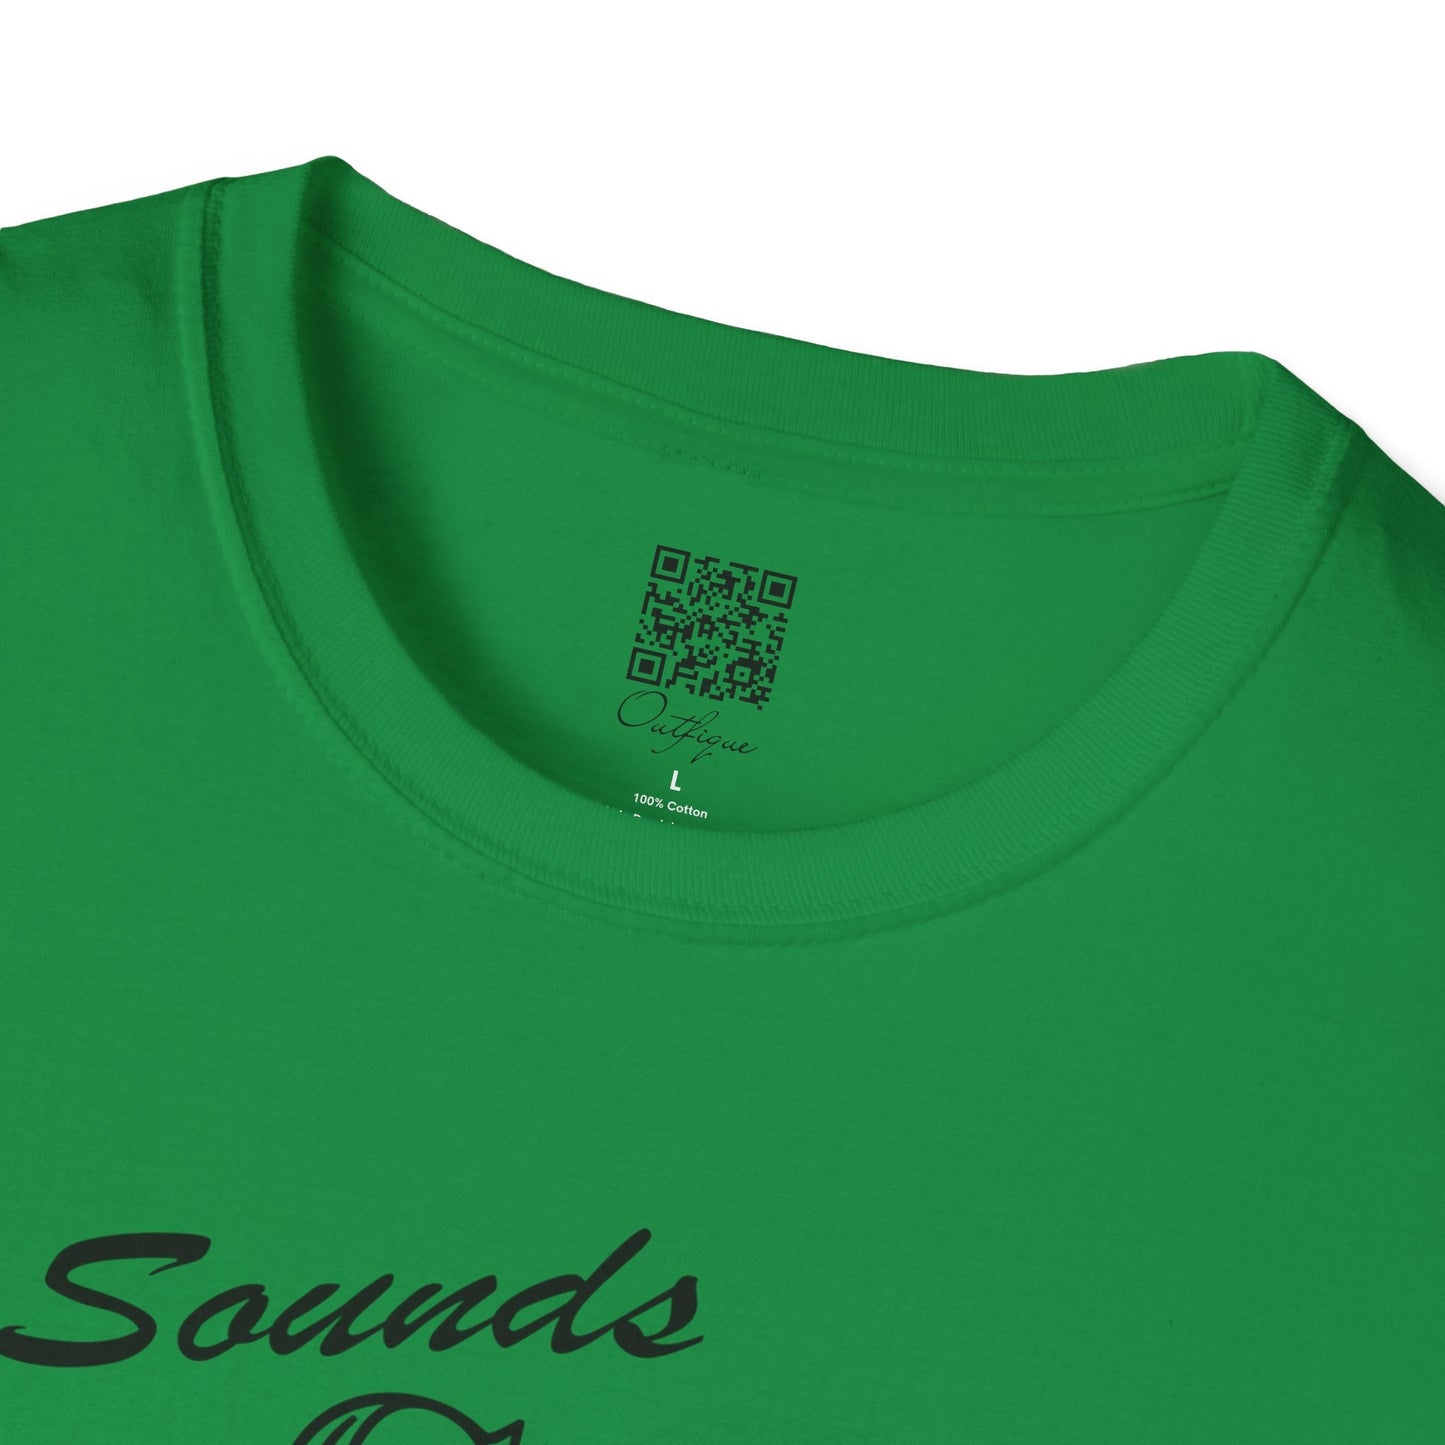 "Sounds Gay, I'm In!" T-Shirt | Outfique | T-Shirt | Crew neck